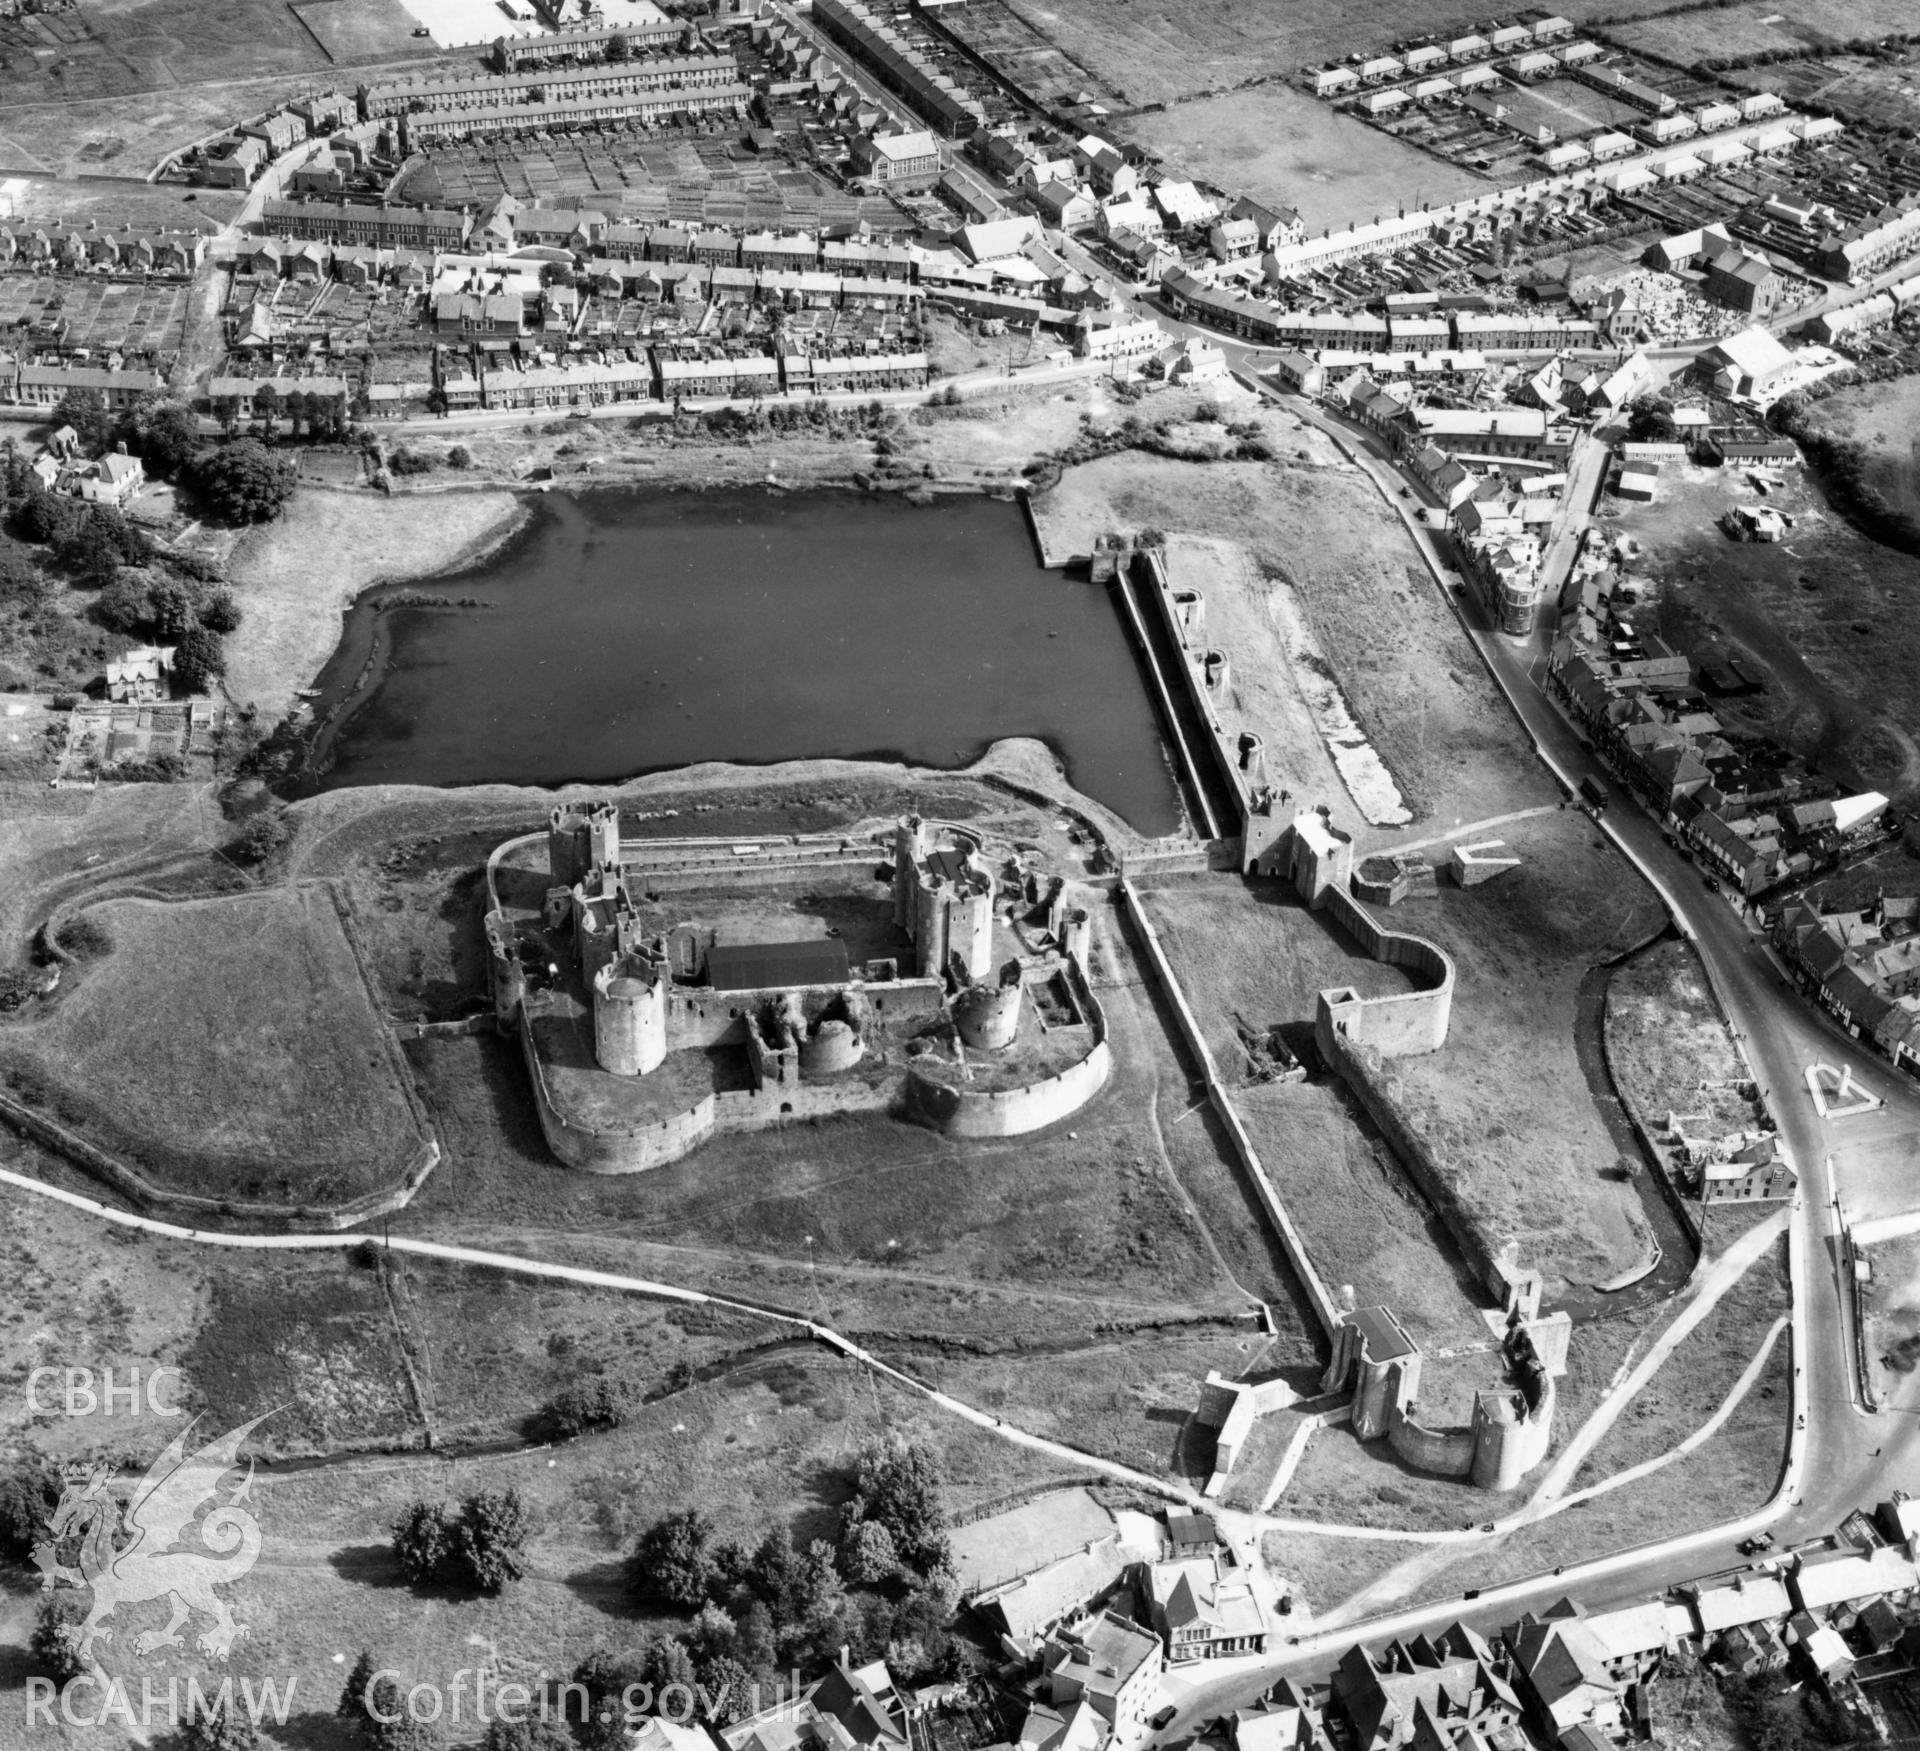 View of Caerphilly showing castle. Oblique aerial photograph, 5?" cut roll film.